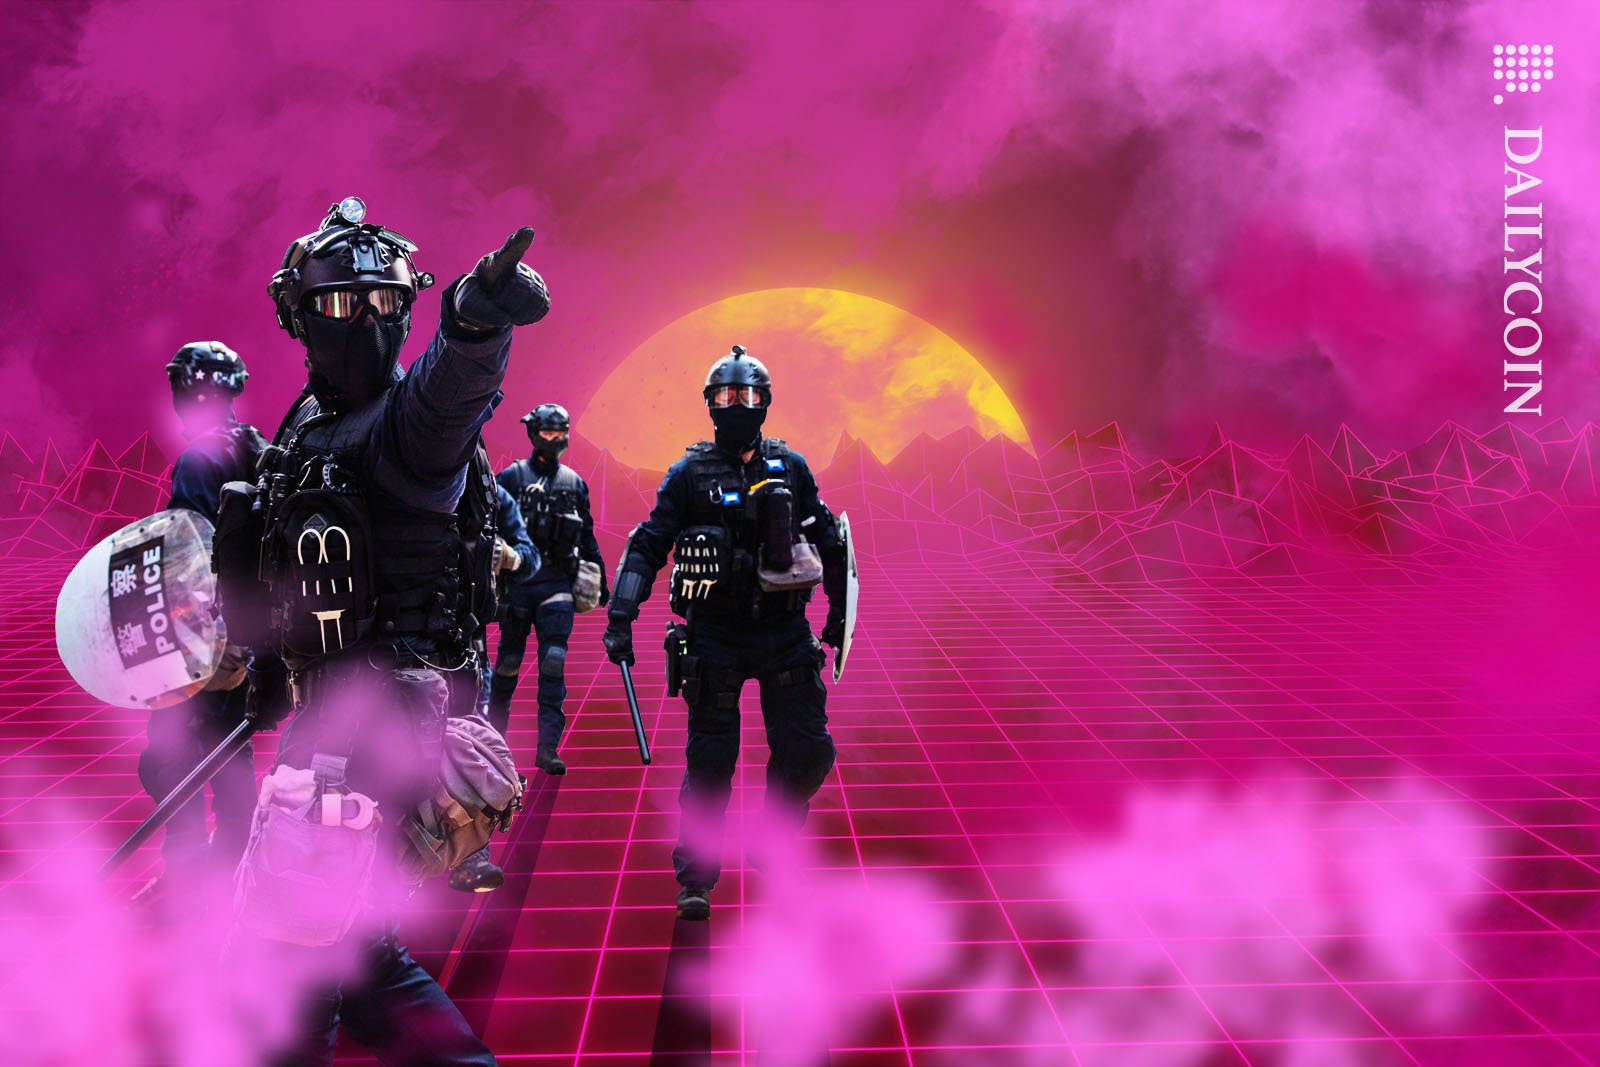 Chinese riot police raiding the metaverse surrounded by pink smoke.